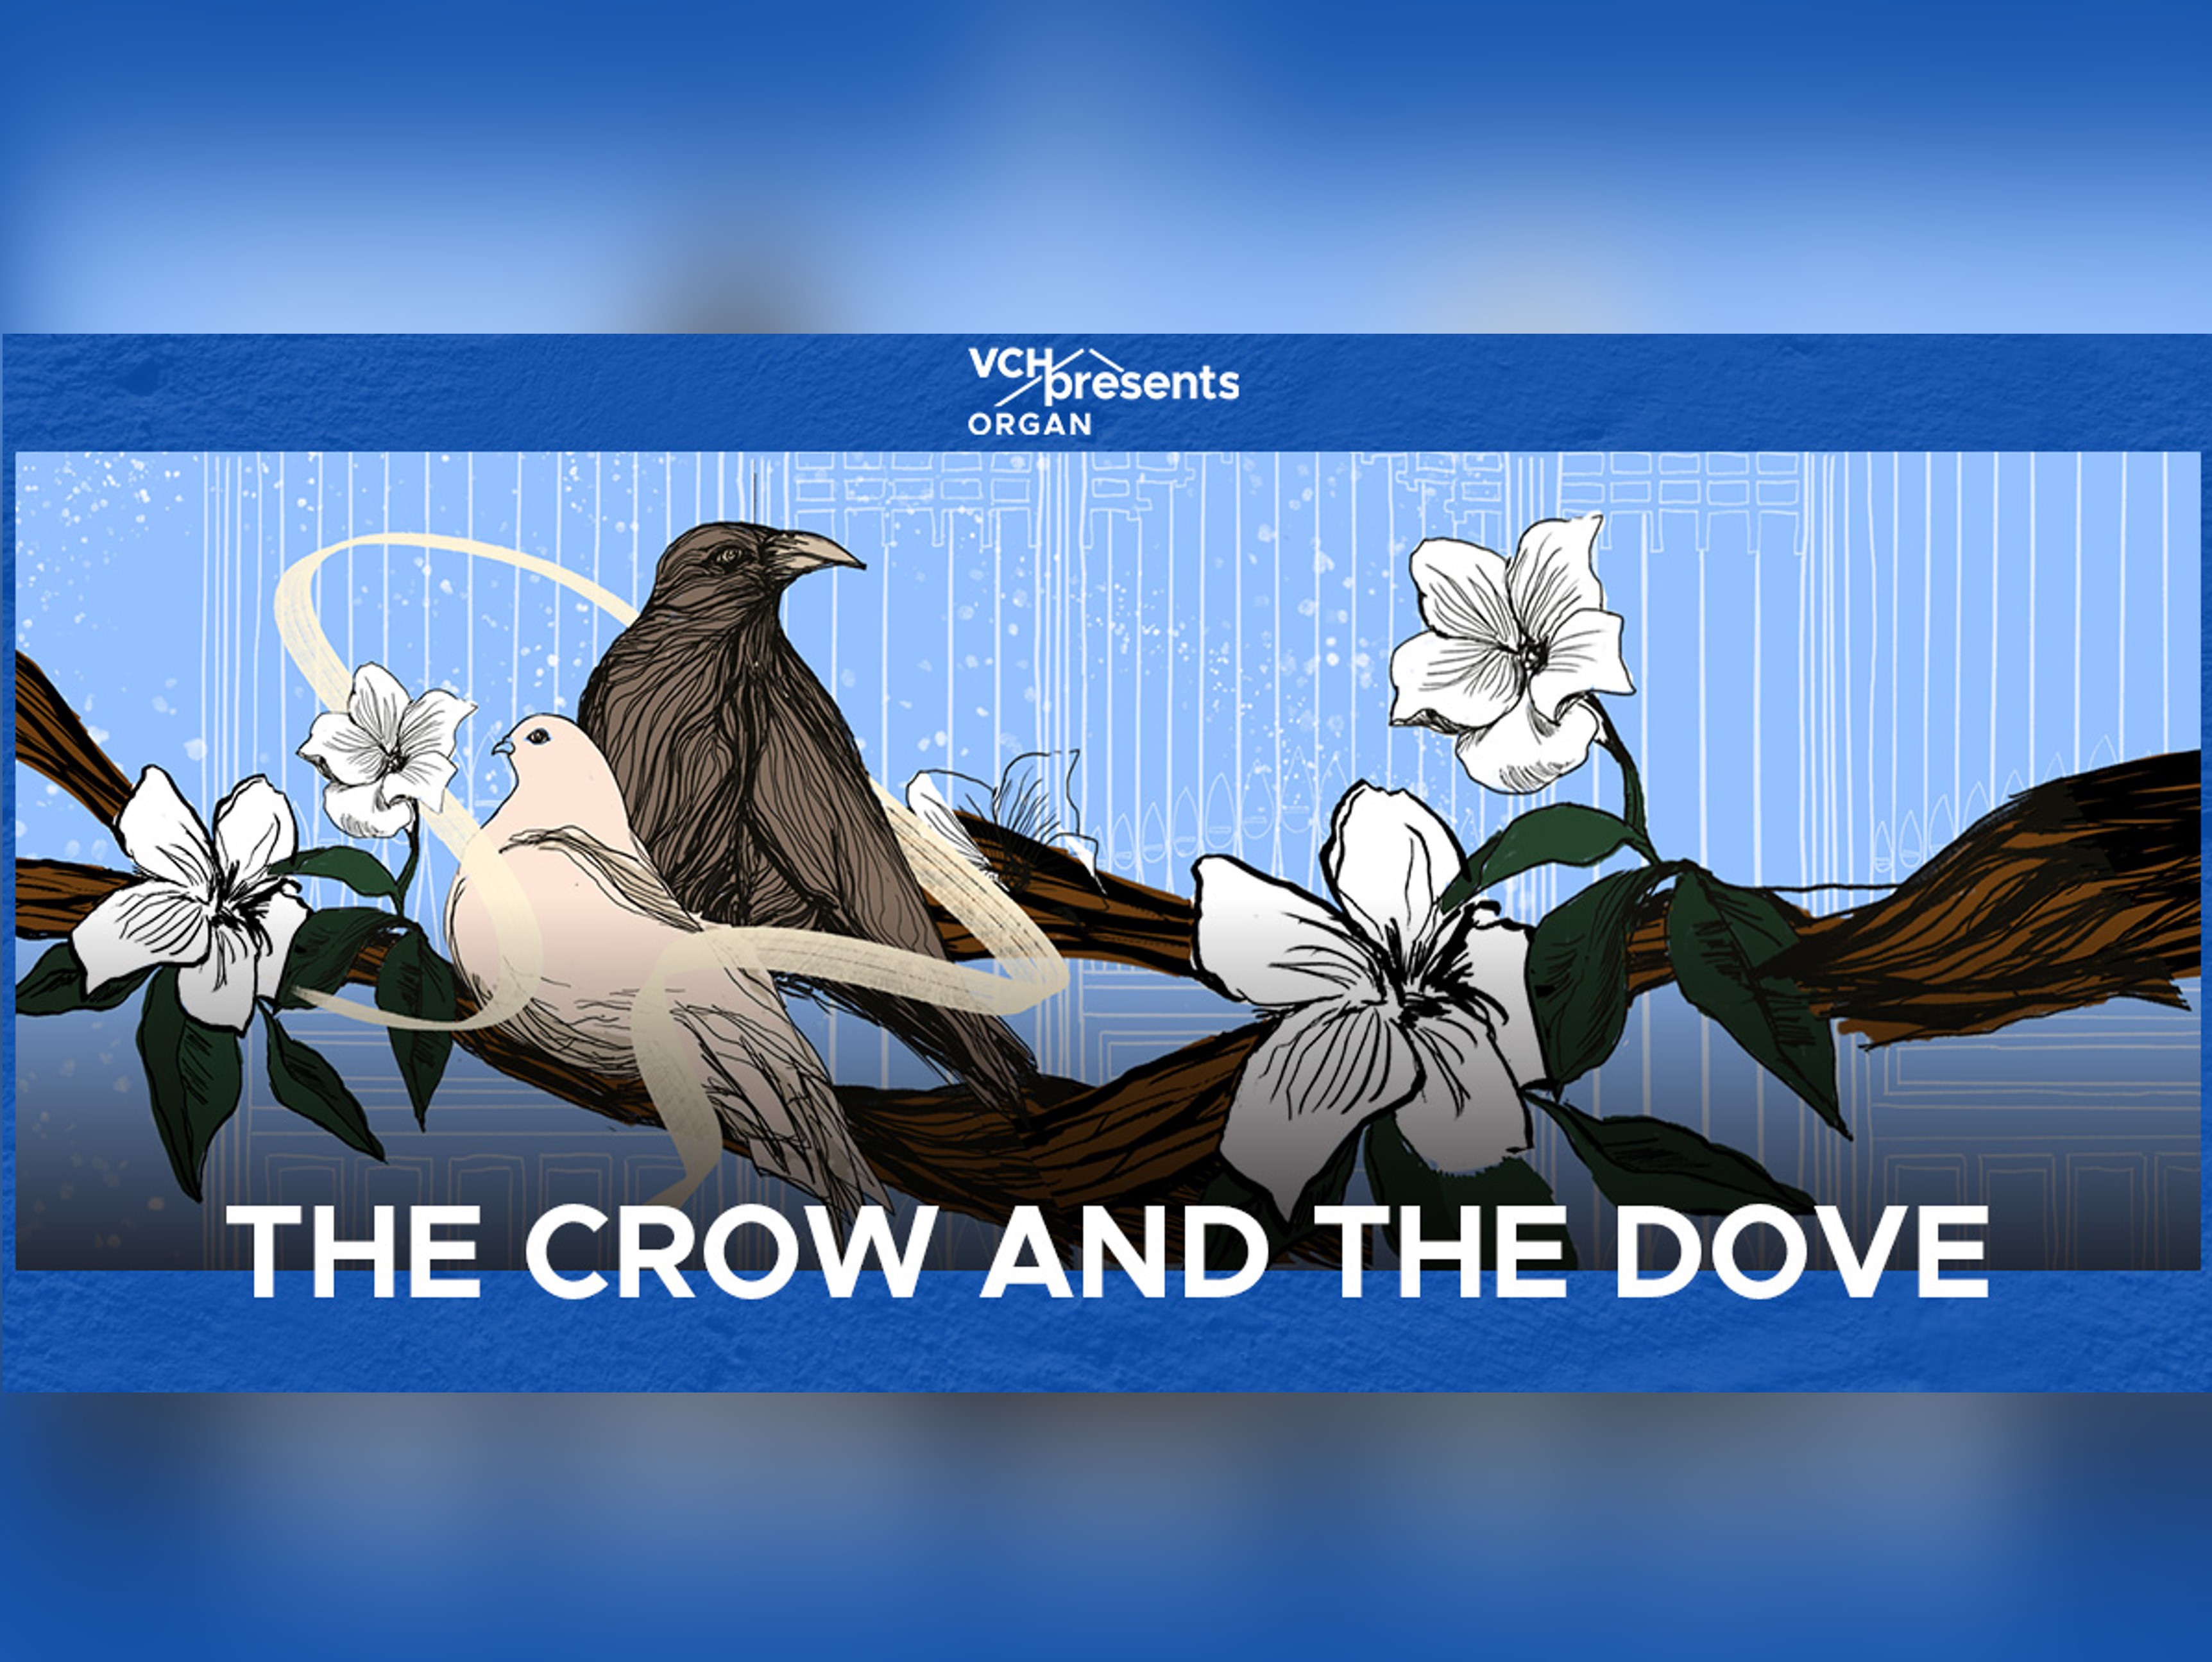 VCHpresents Organ: The Crow and the Dove